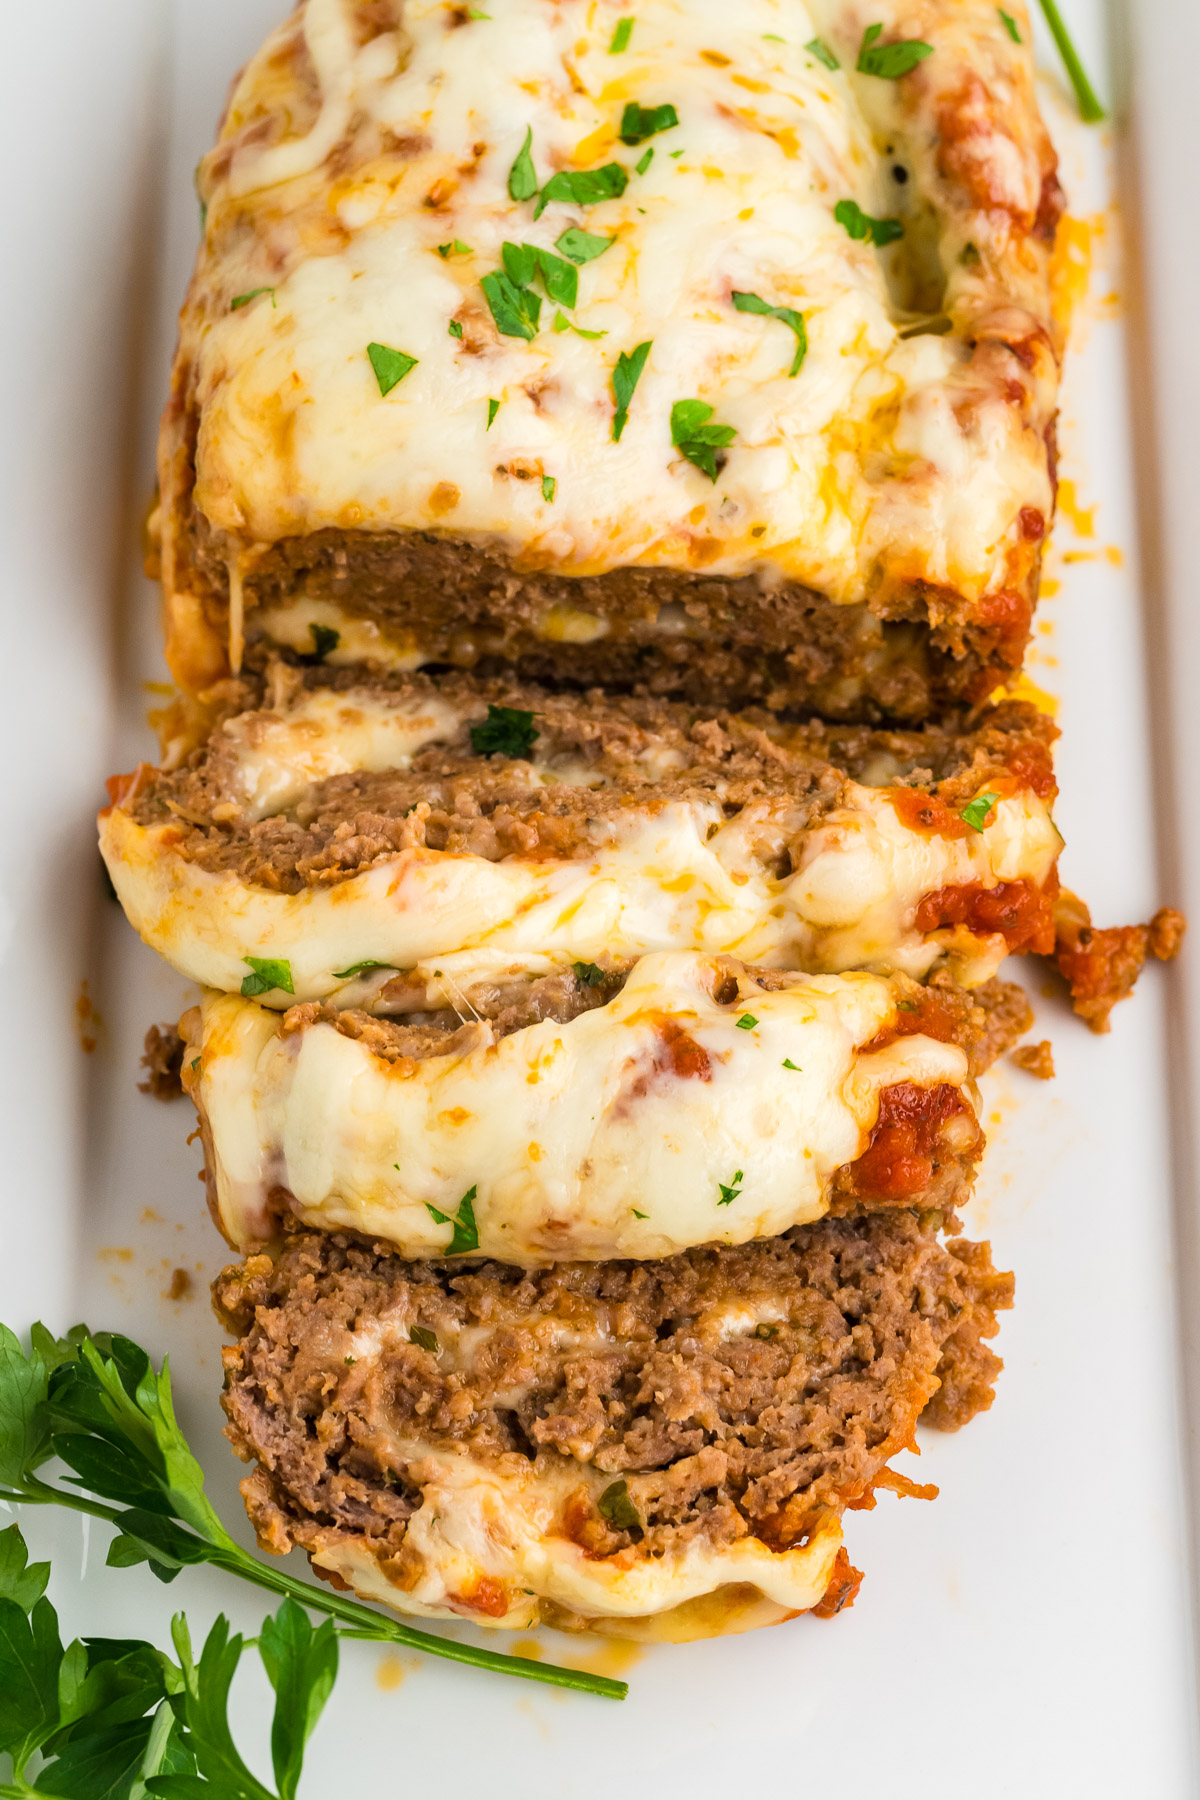 Make this easy Italian Meatloaf recipe!